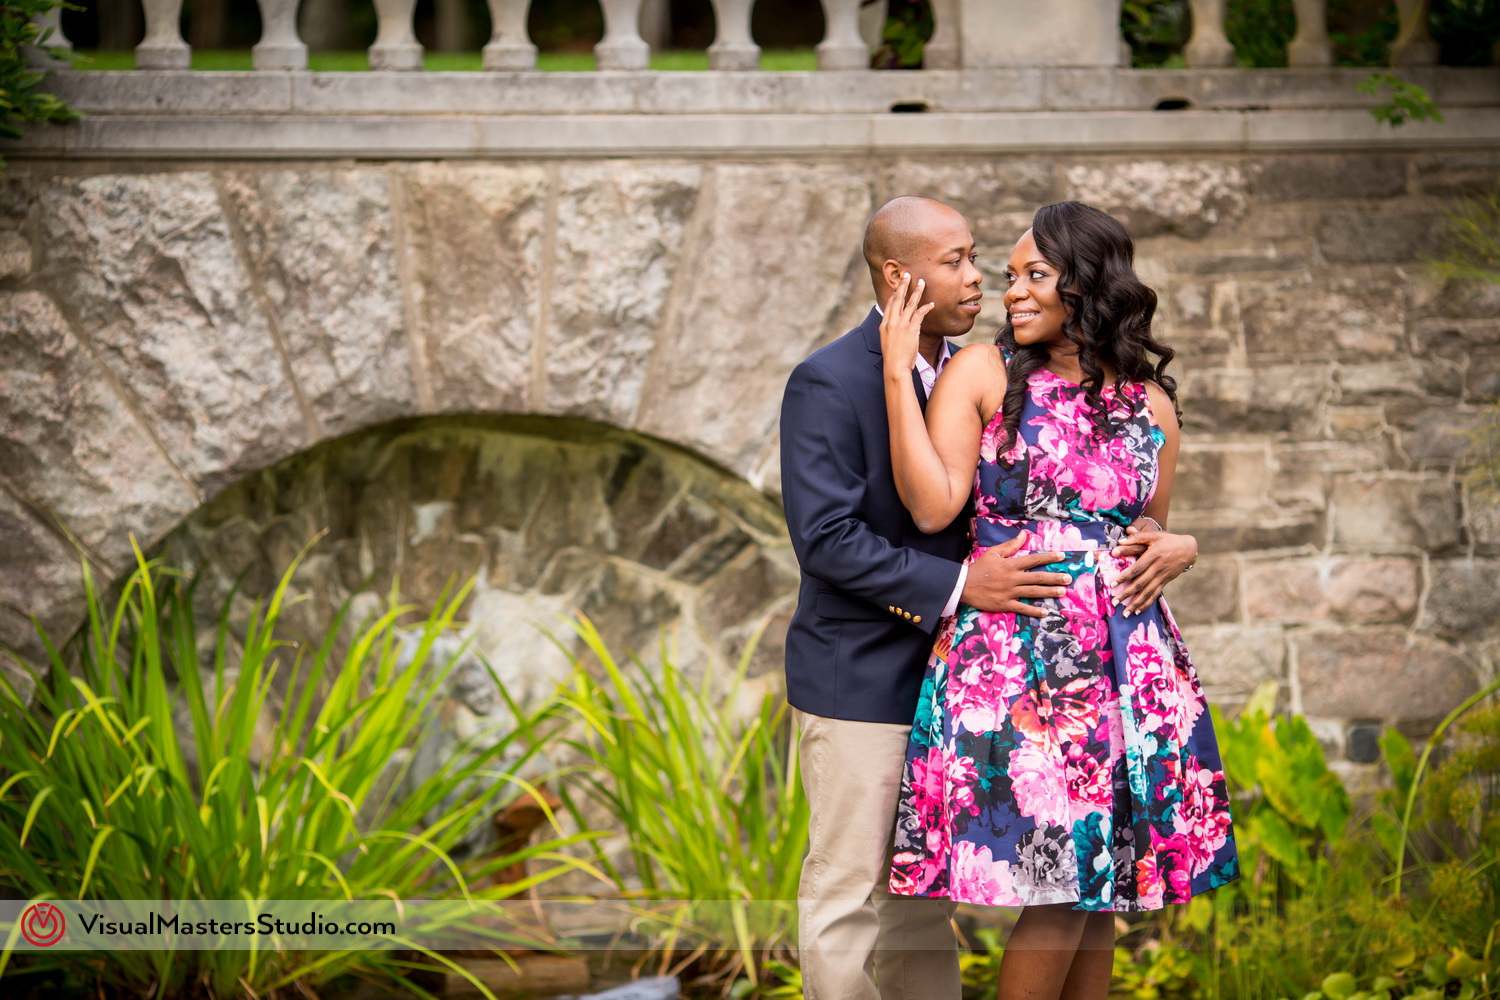 Casually Elegant Engagement Session At New Jersey Botanical Garden